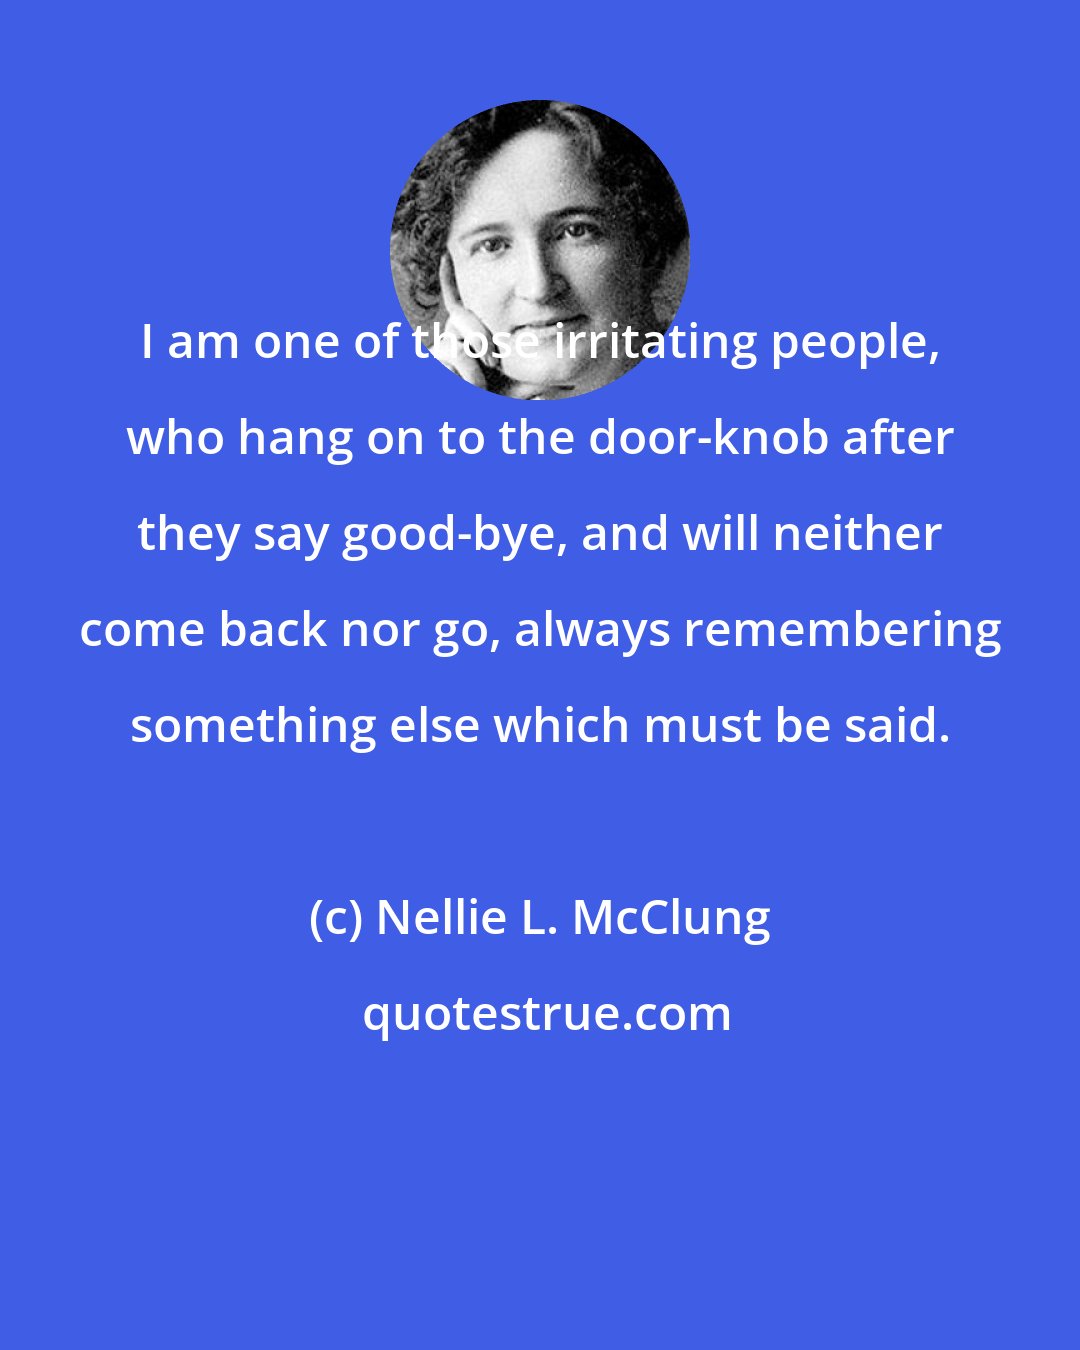 Nellie L. McClung: I am one of those irritating people, who hang on to the door-knob after they say good-bye, and will neither come back nor go, always remembering something else which must be said.